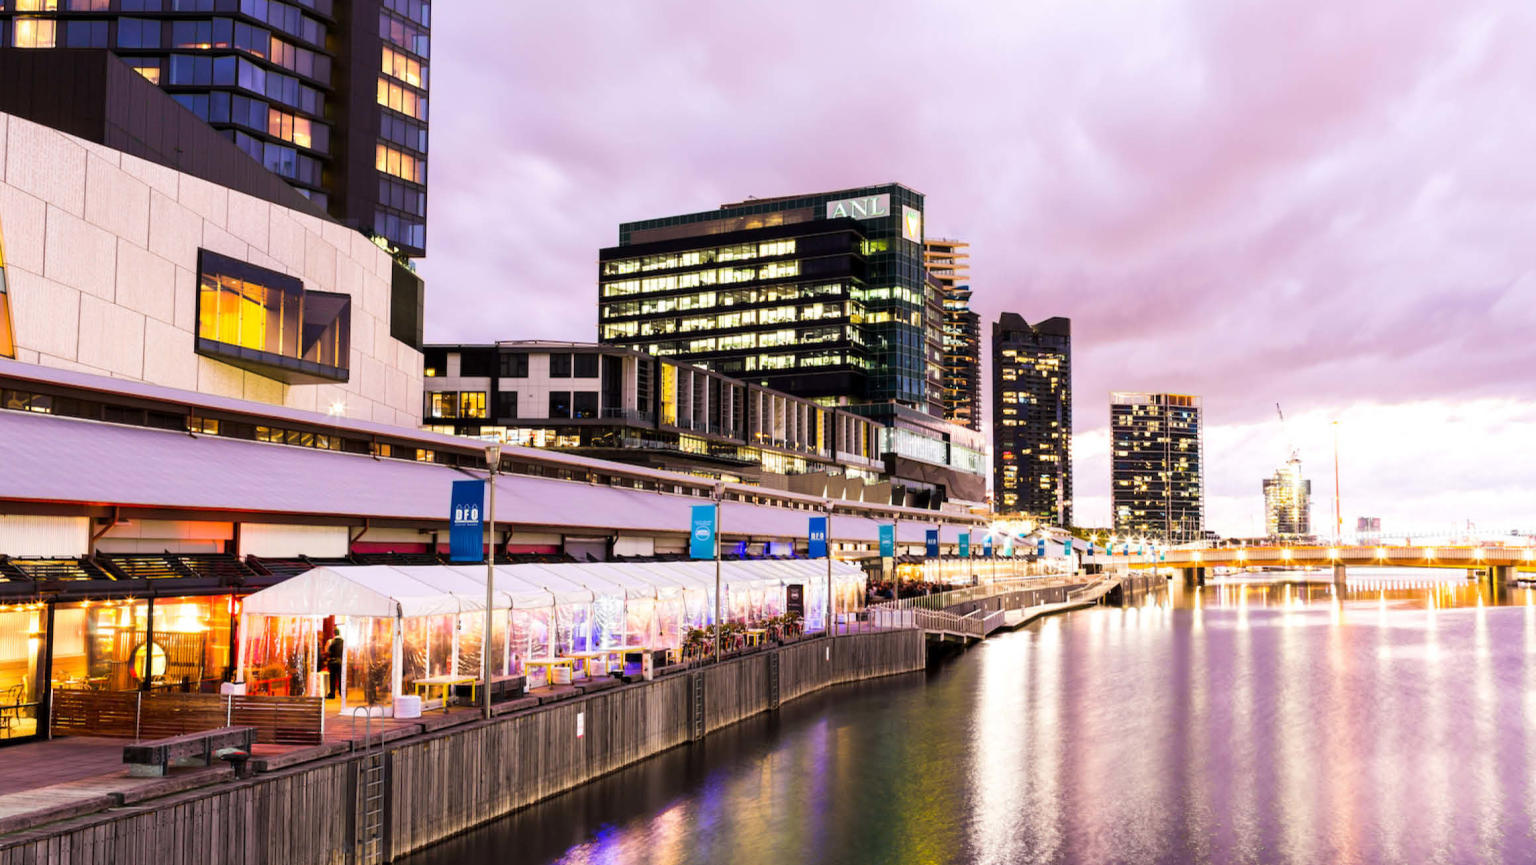 An image showcasing the vibrant South Wharf precinct in Melbourne. The Yarra/Birrarung River takes center stage, elegantly reflecting the pathway lined with stylish apartment buildings and restaurants.